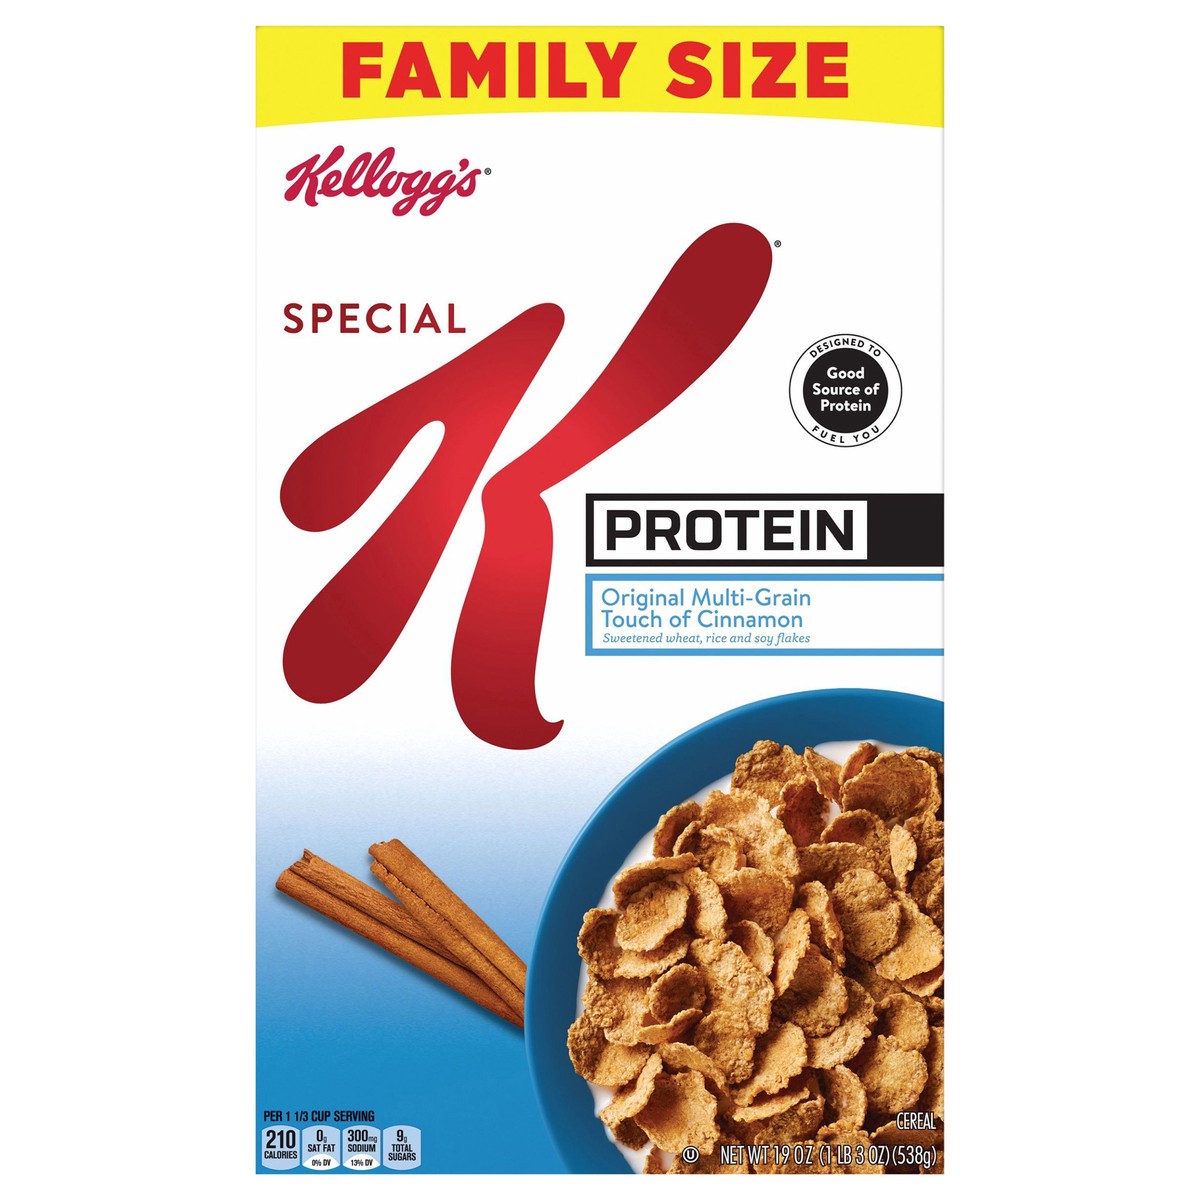 slide 1 of 11, Special K Kellogg's Special K Protein Cold Breakfast Cereal, 10g Protein, 11 Vitamins and Minerals, Family Size, Original Multi-Grain Touch of Cinnamon, 19oz Box, 1 Box, 19 oz